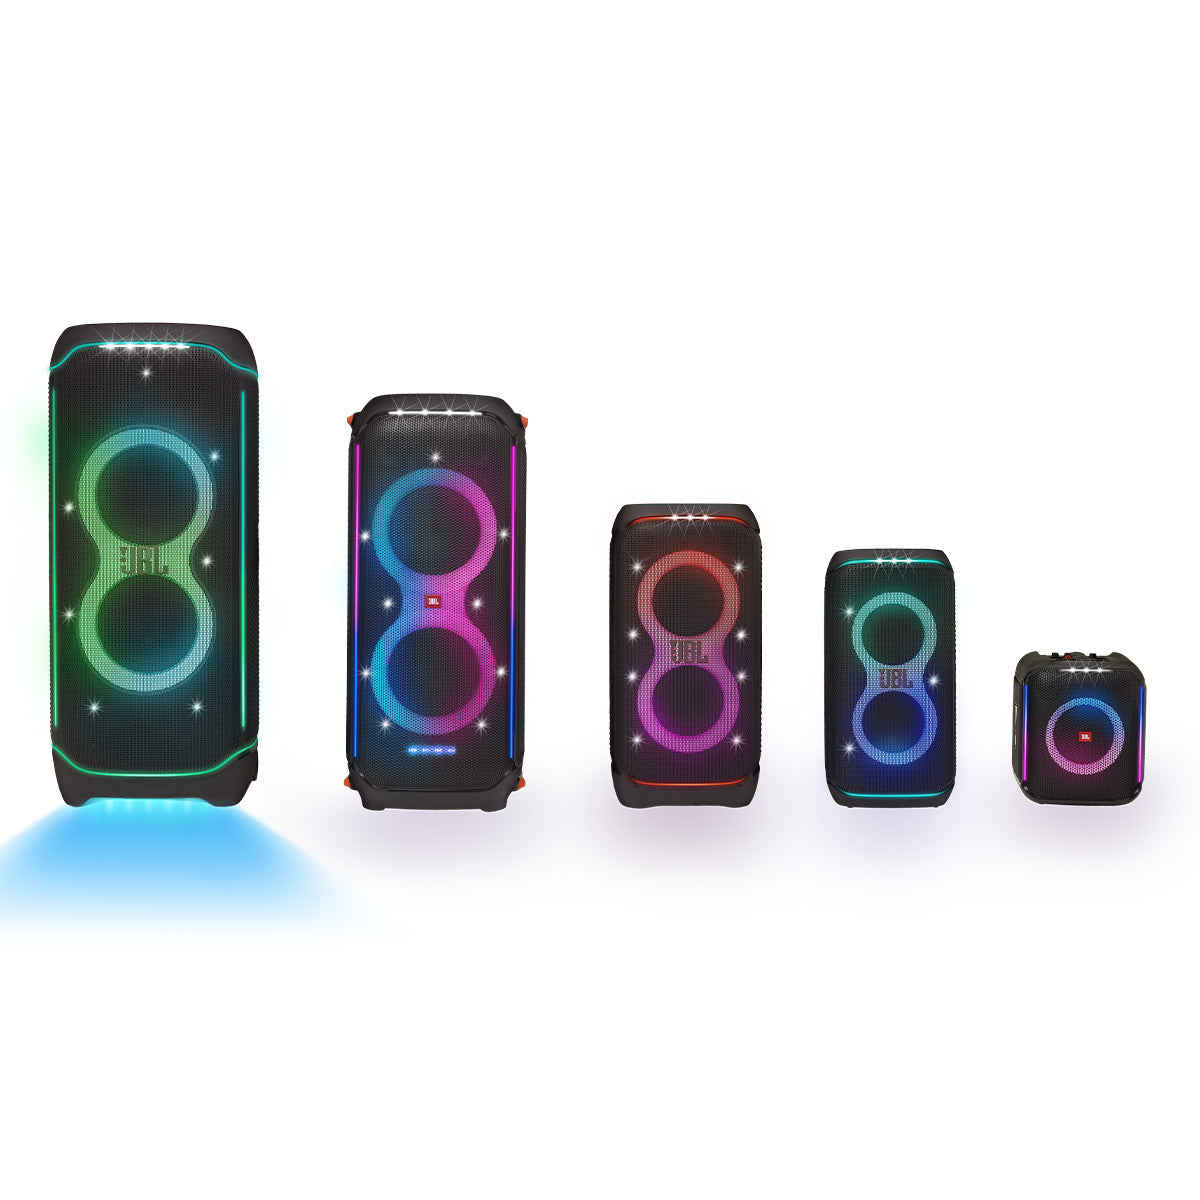 JBL PartyBox 310 Bluetooth Portable Party Speaker with Dazzling Lights